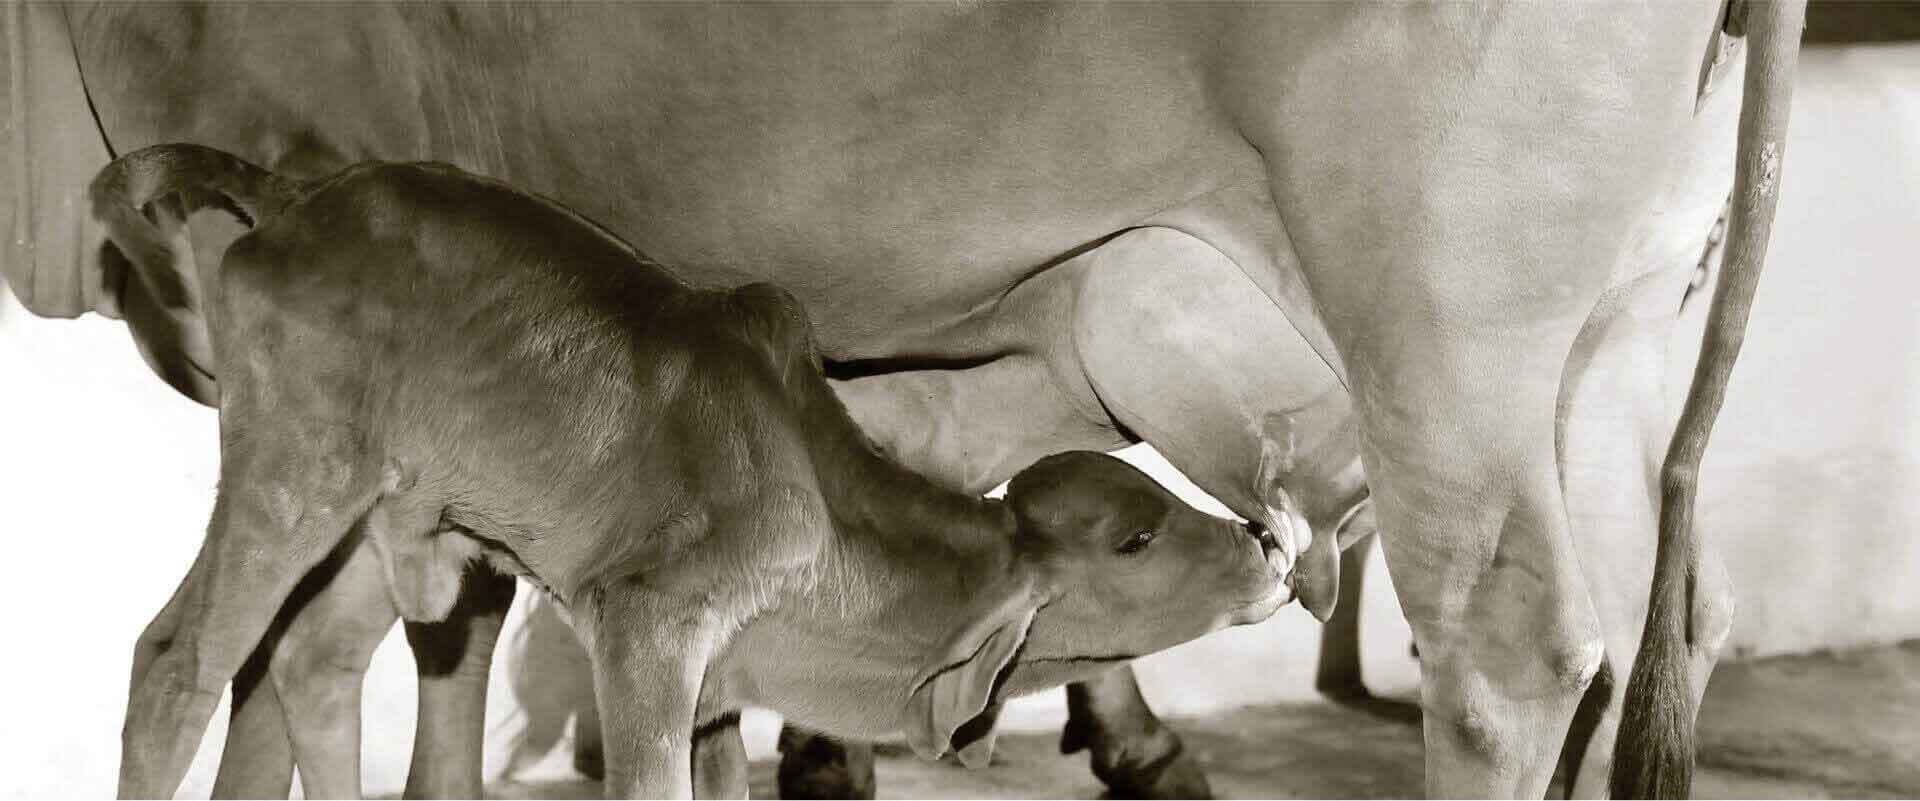 The calf is the first priority and the rest of the happy milk is for you